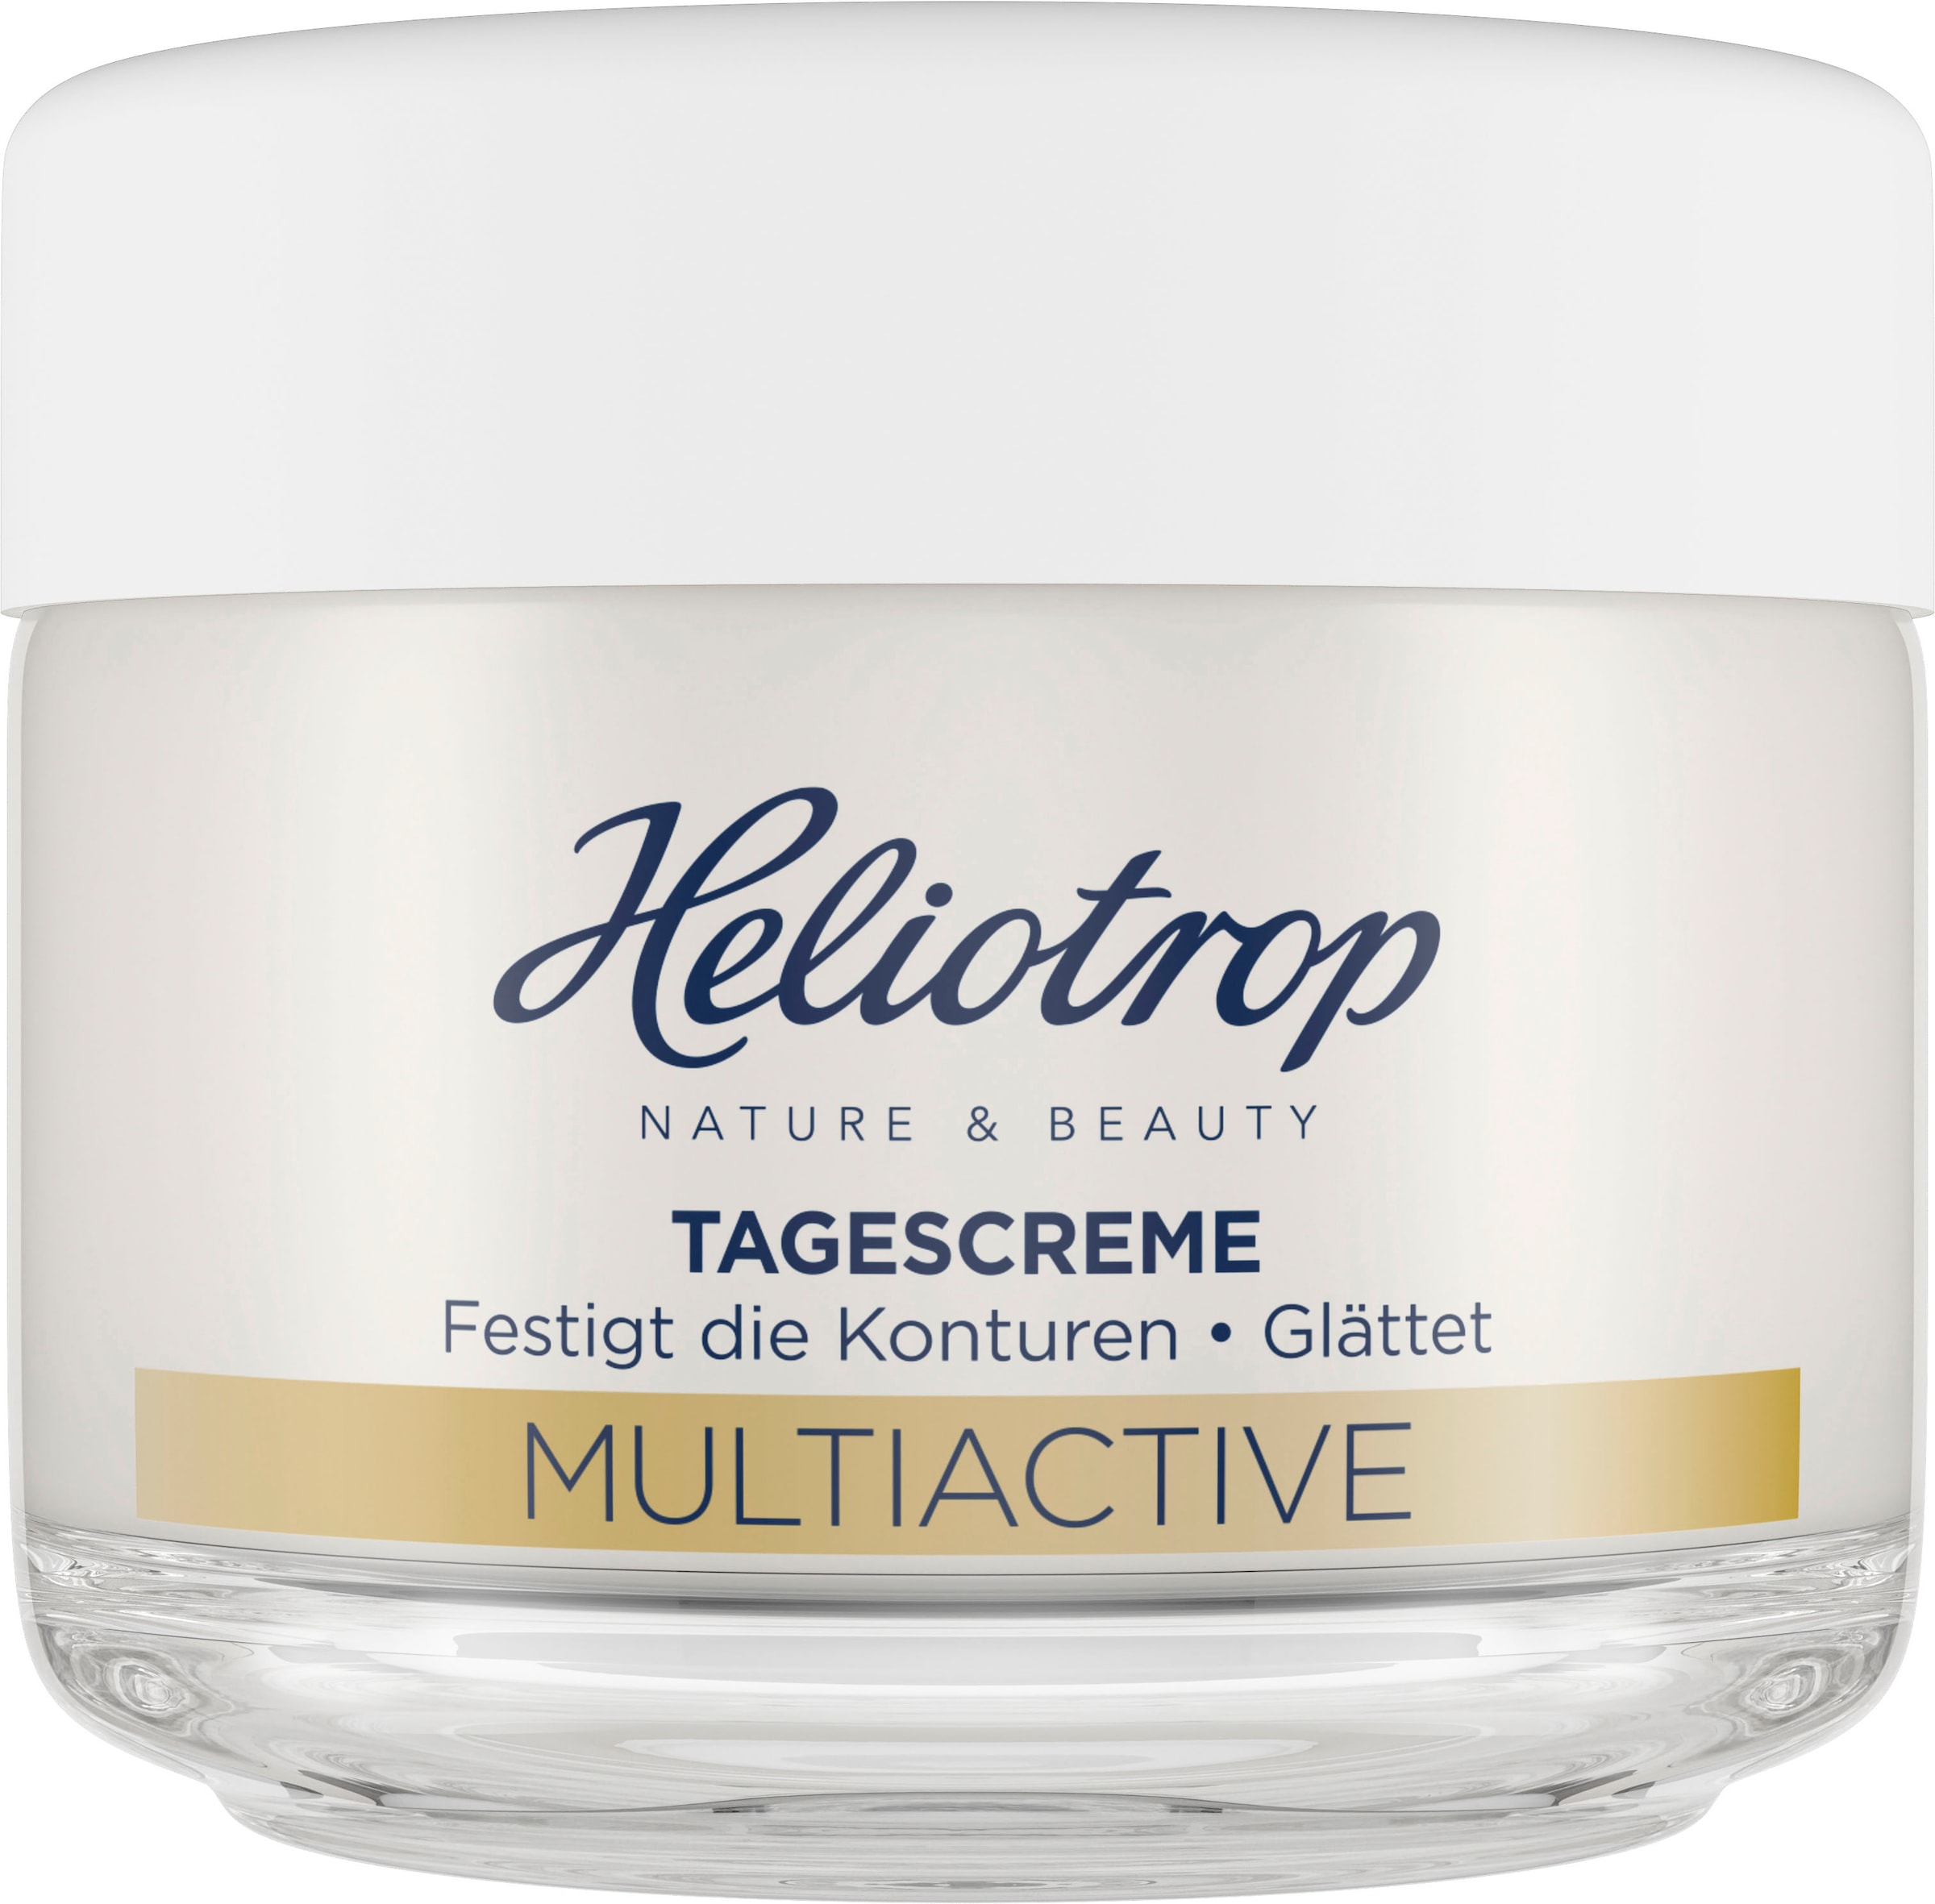 Tagescreme »Multiactive«